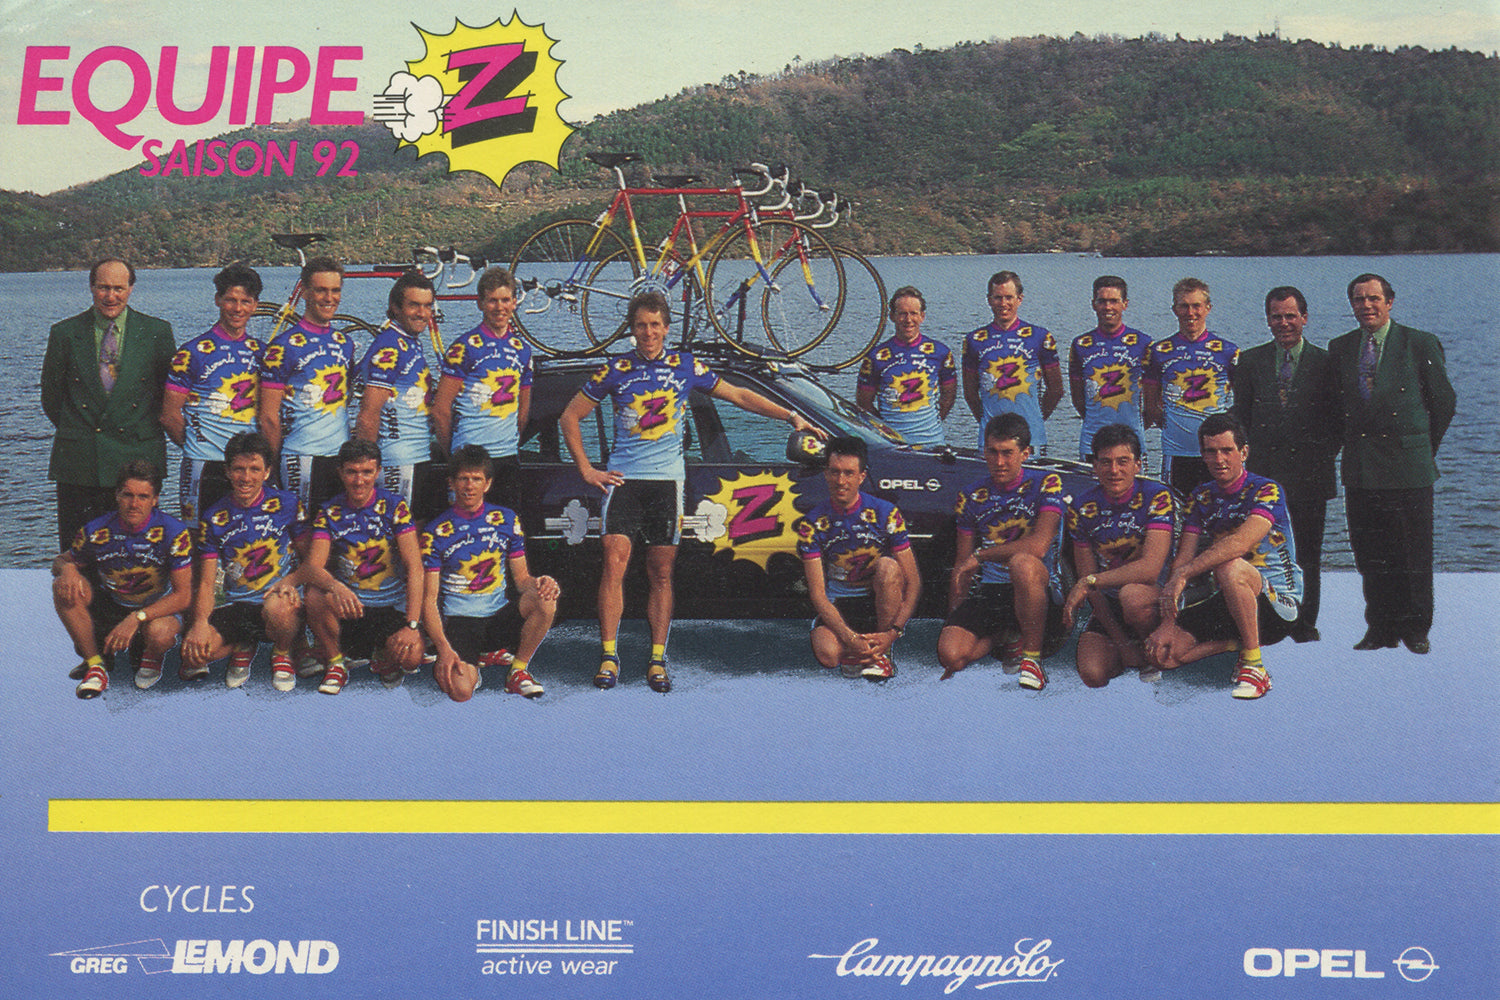 Equipe Vêtements Z-Peugeot Cycling Team postcard from 1992 with Greg Lemond in the centre.